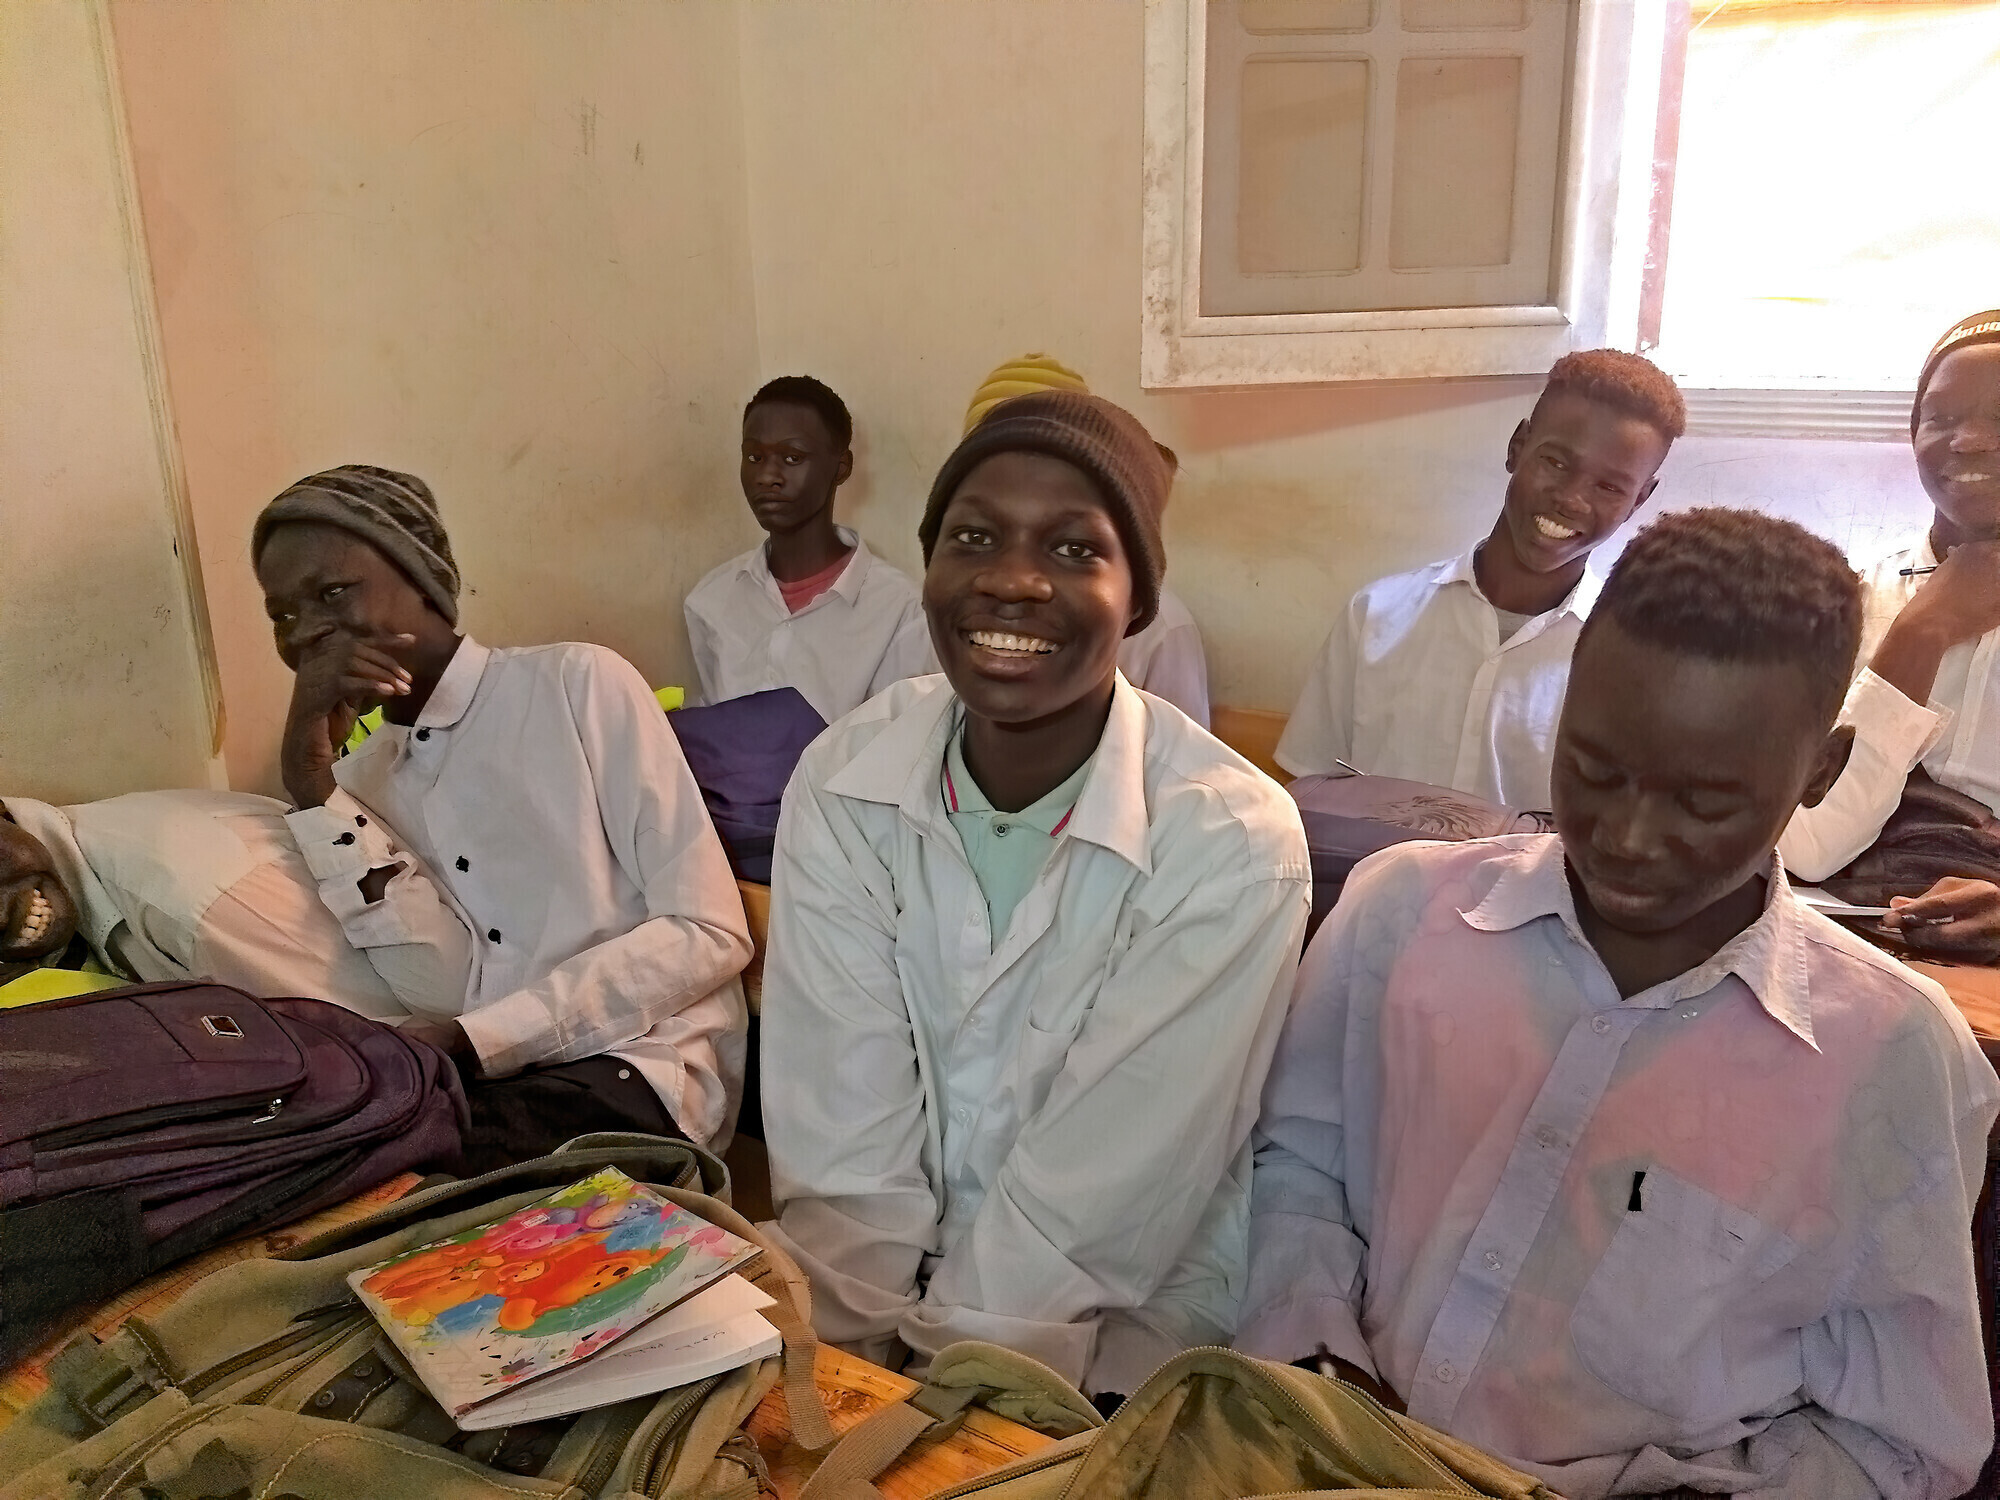 A group of Sudanese students sit at their desks in a small classroom.